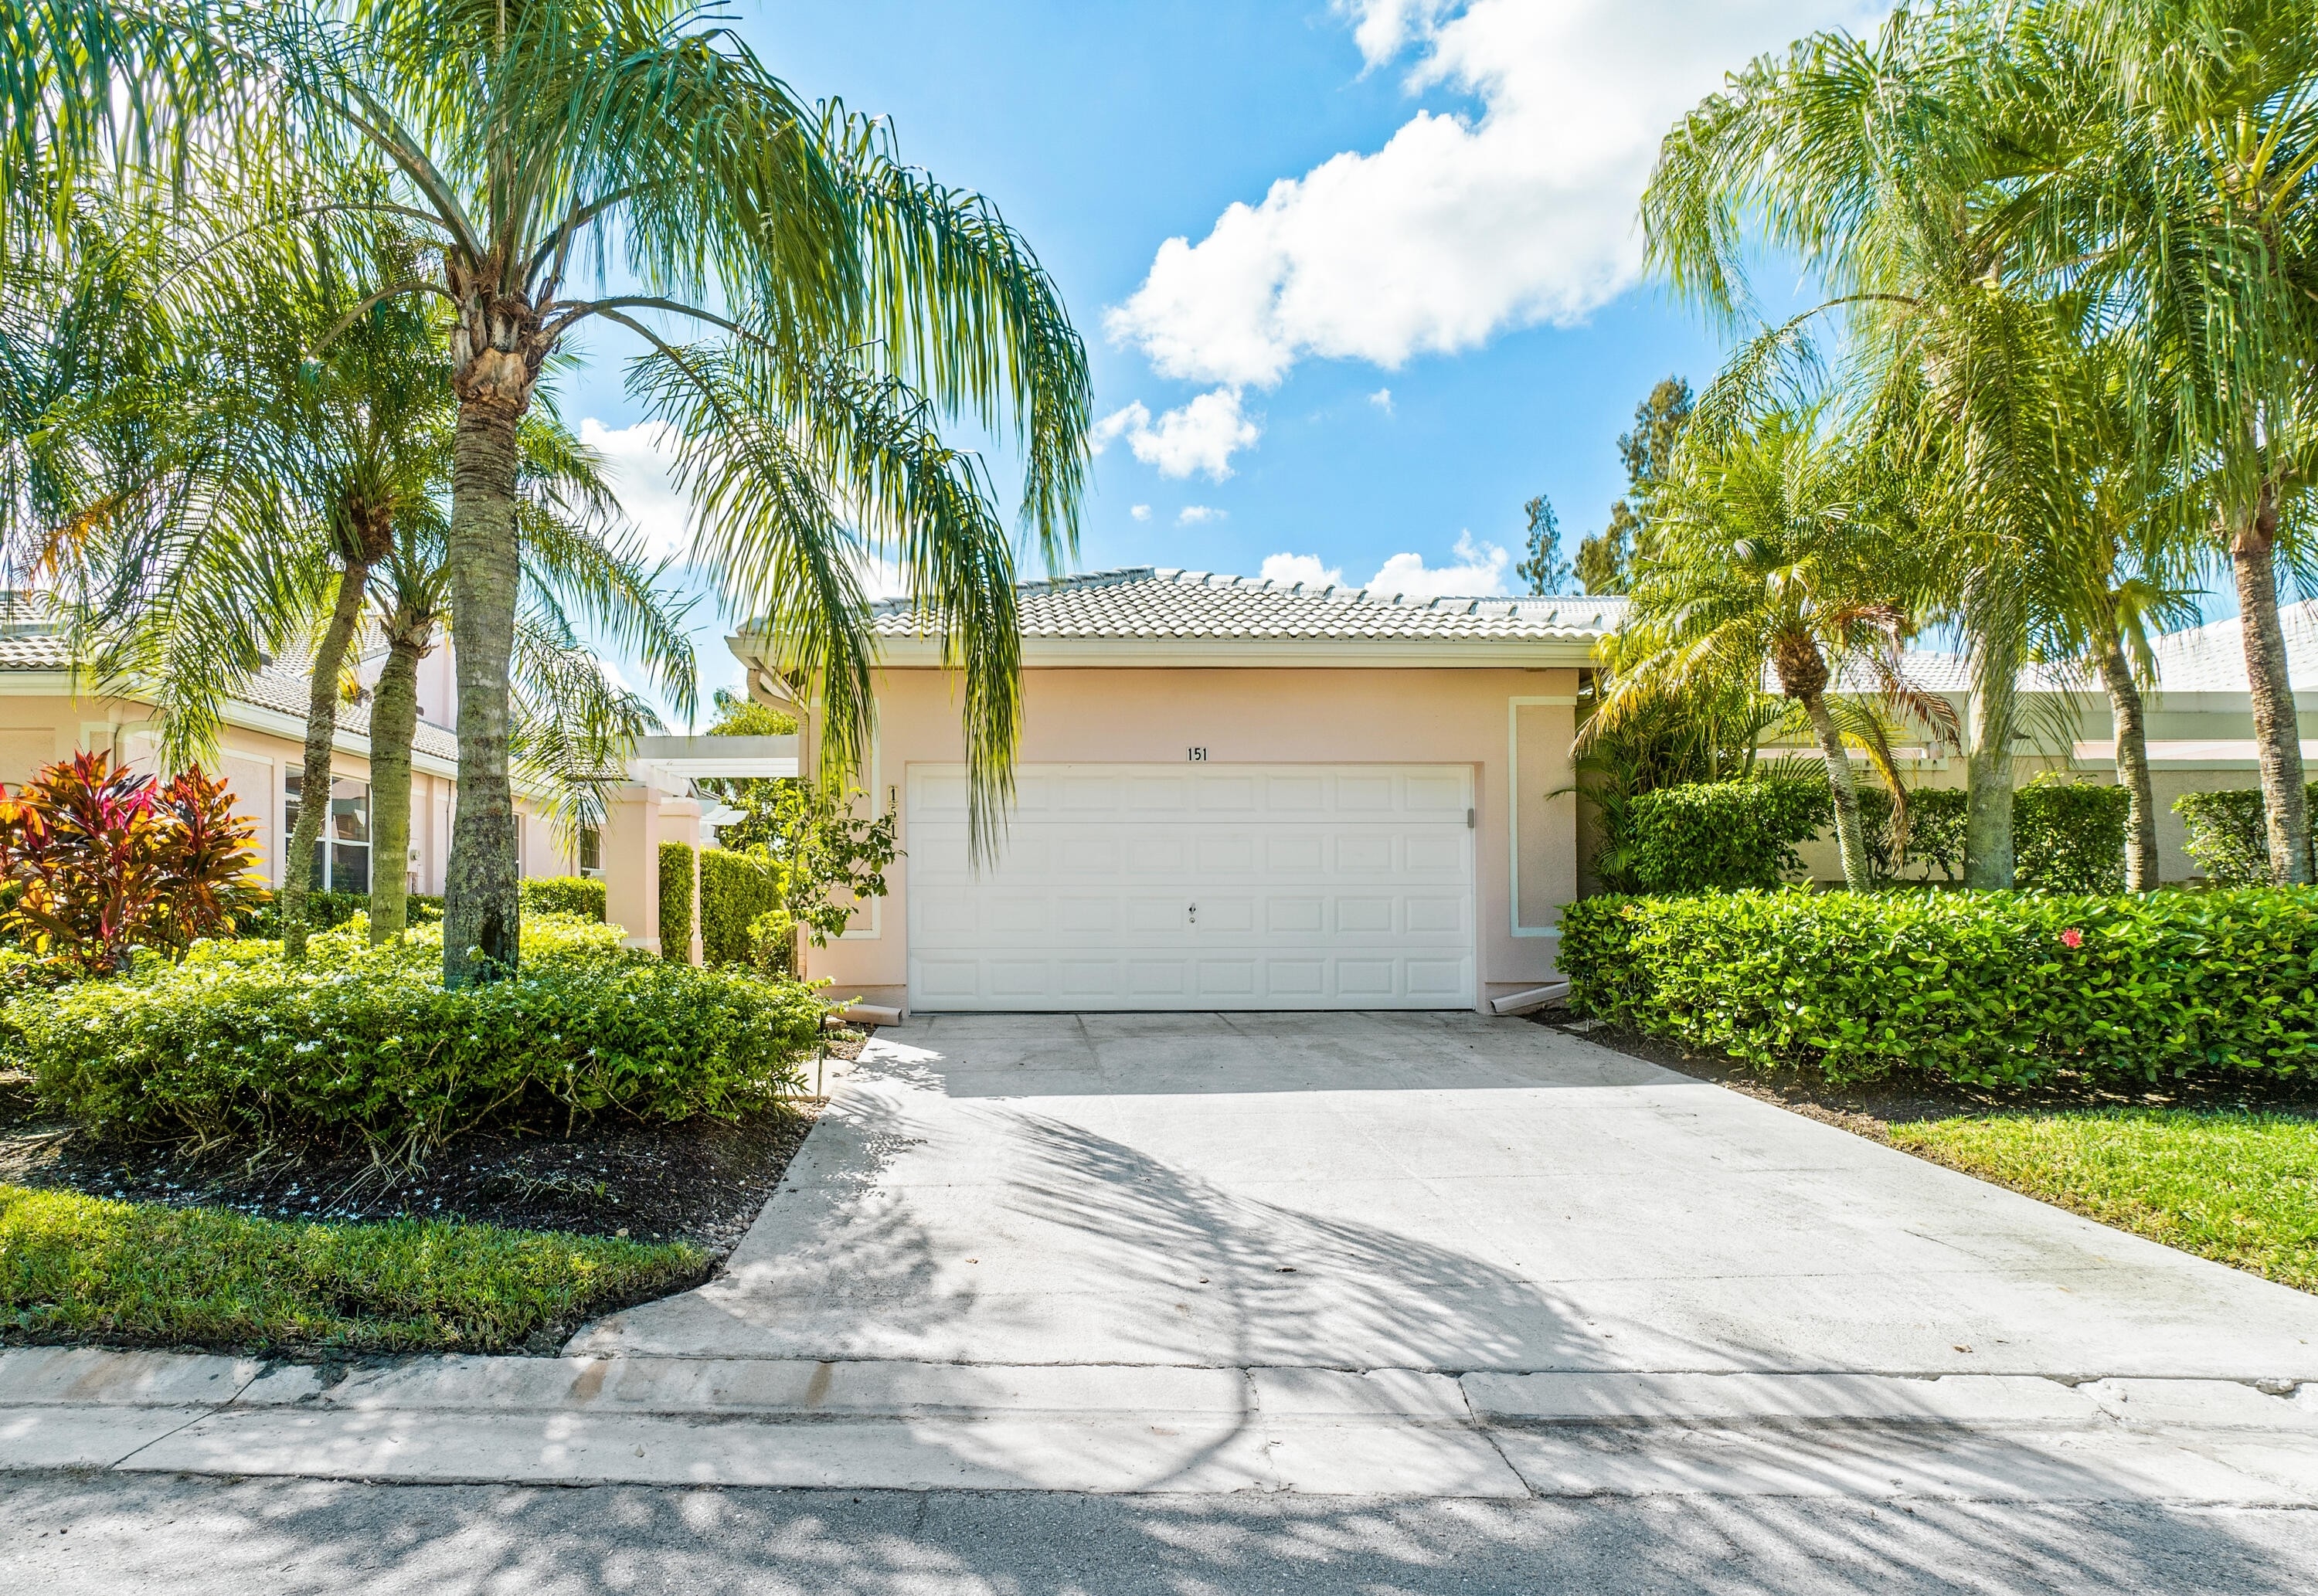 Single Family Townhouse for Sale at Pga National, Palm Beach Gardens, FL 33418